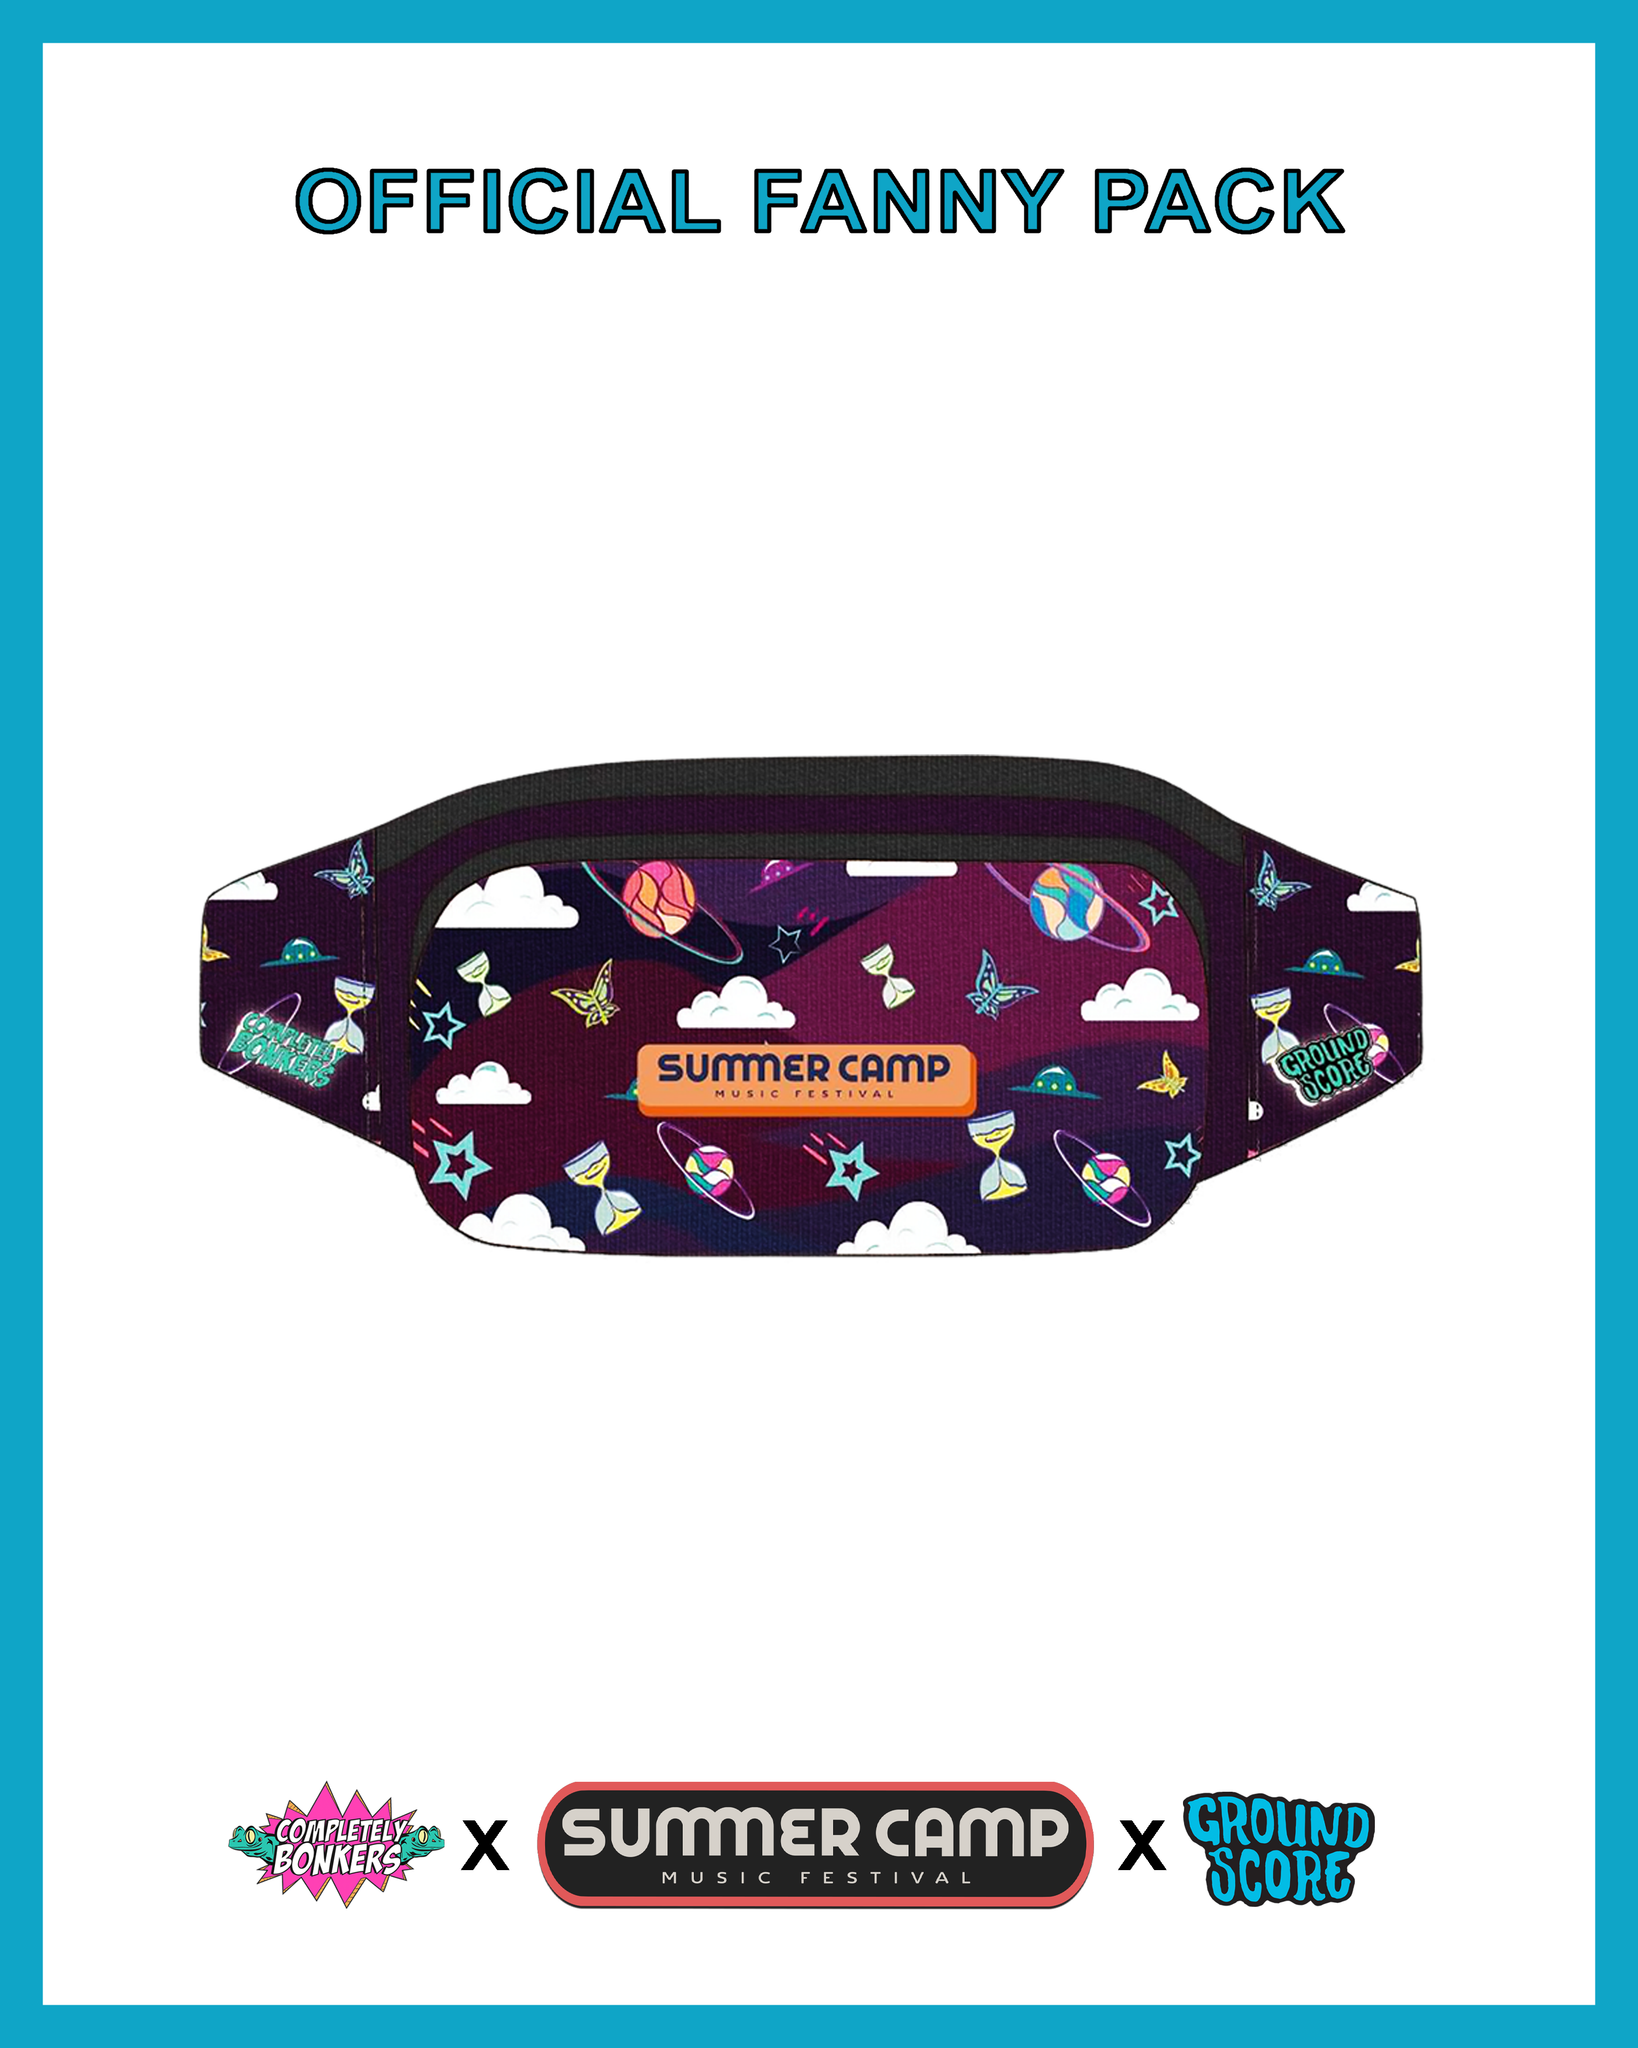 Completely Bonkers - 2022 Official Summer Camp Fanny Pack